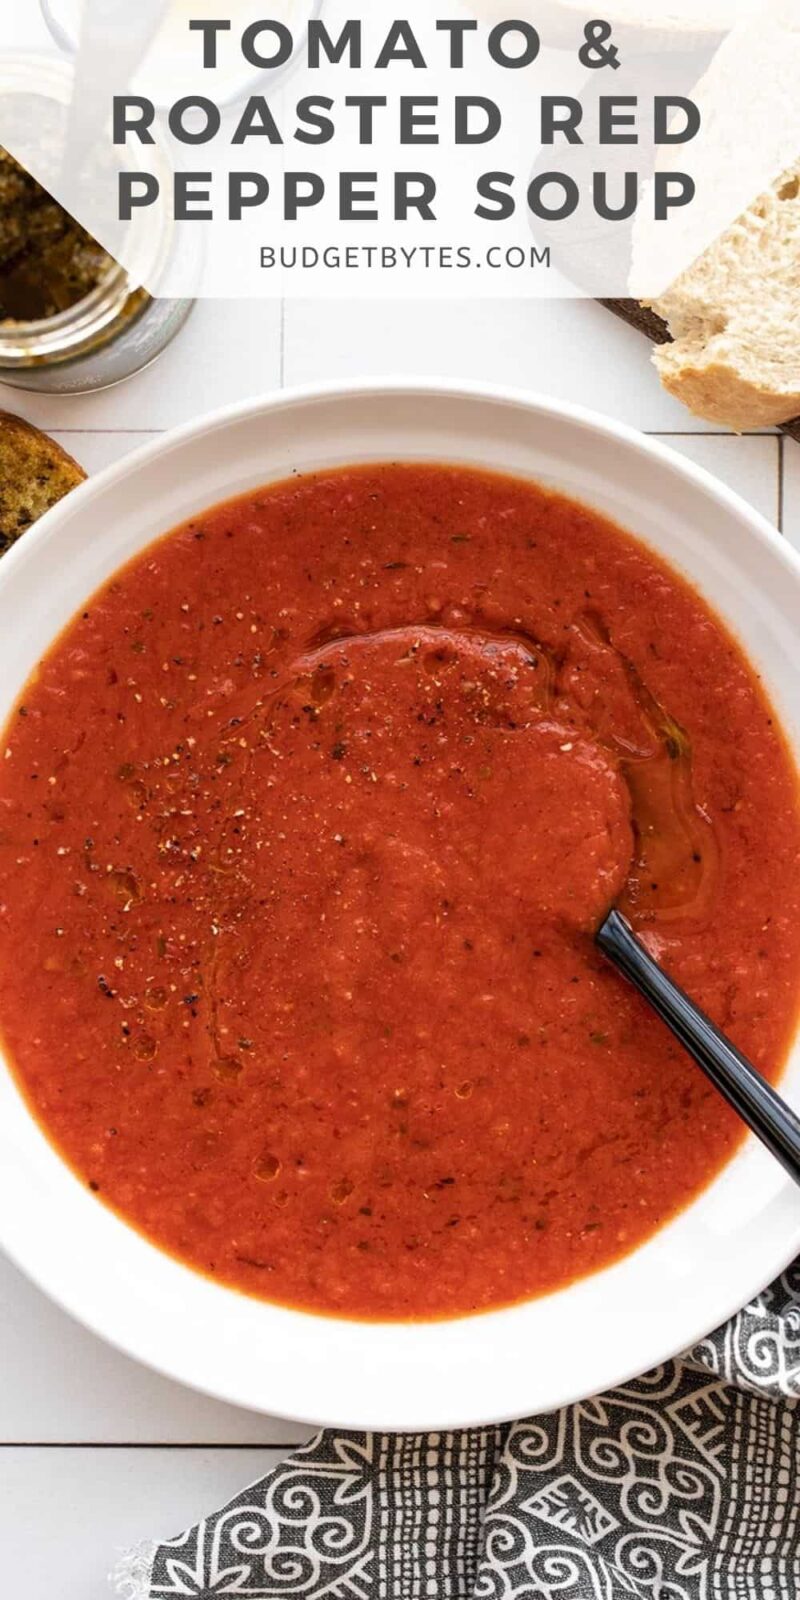 Overhead view of a bowl of tomato & roasted red pepper soup.